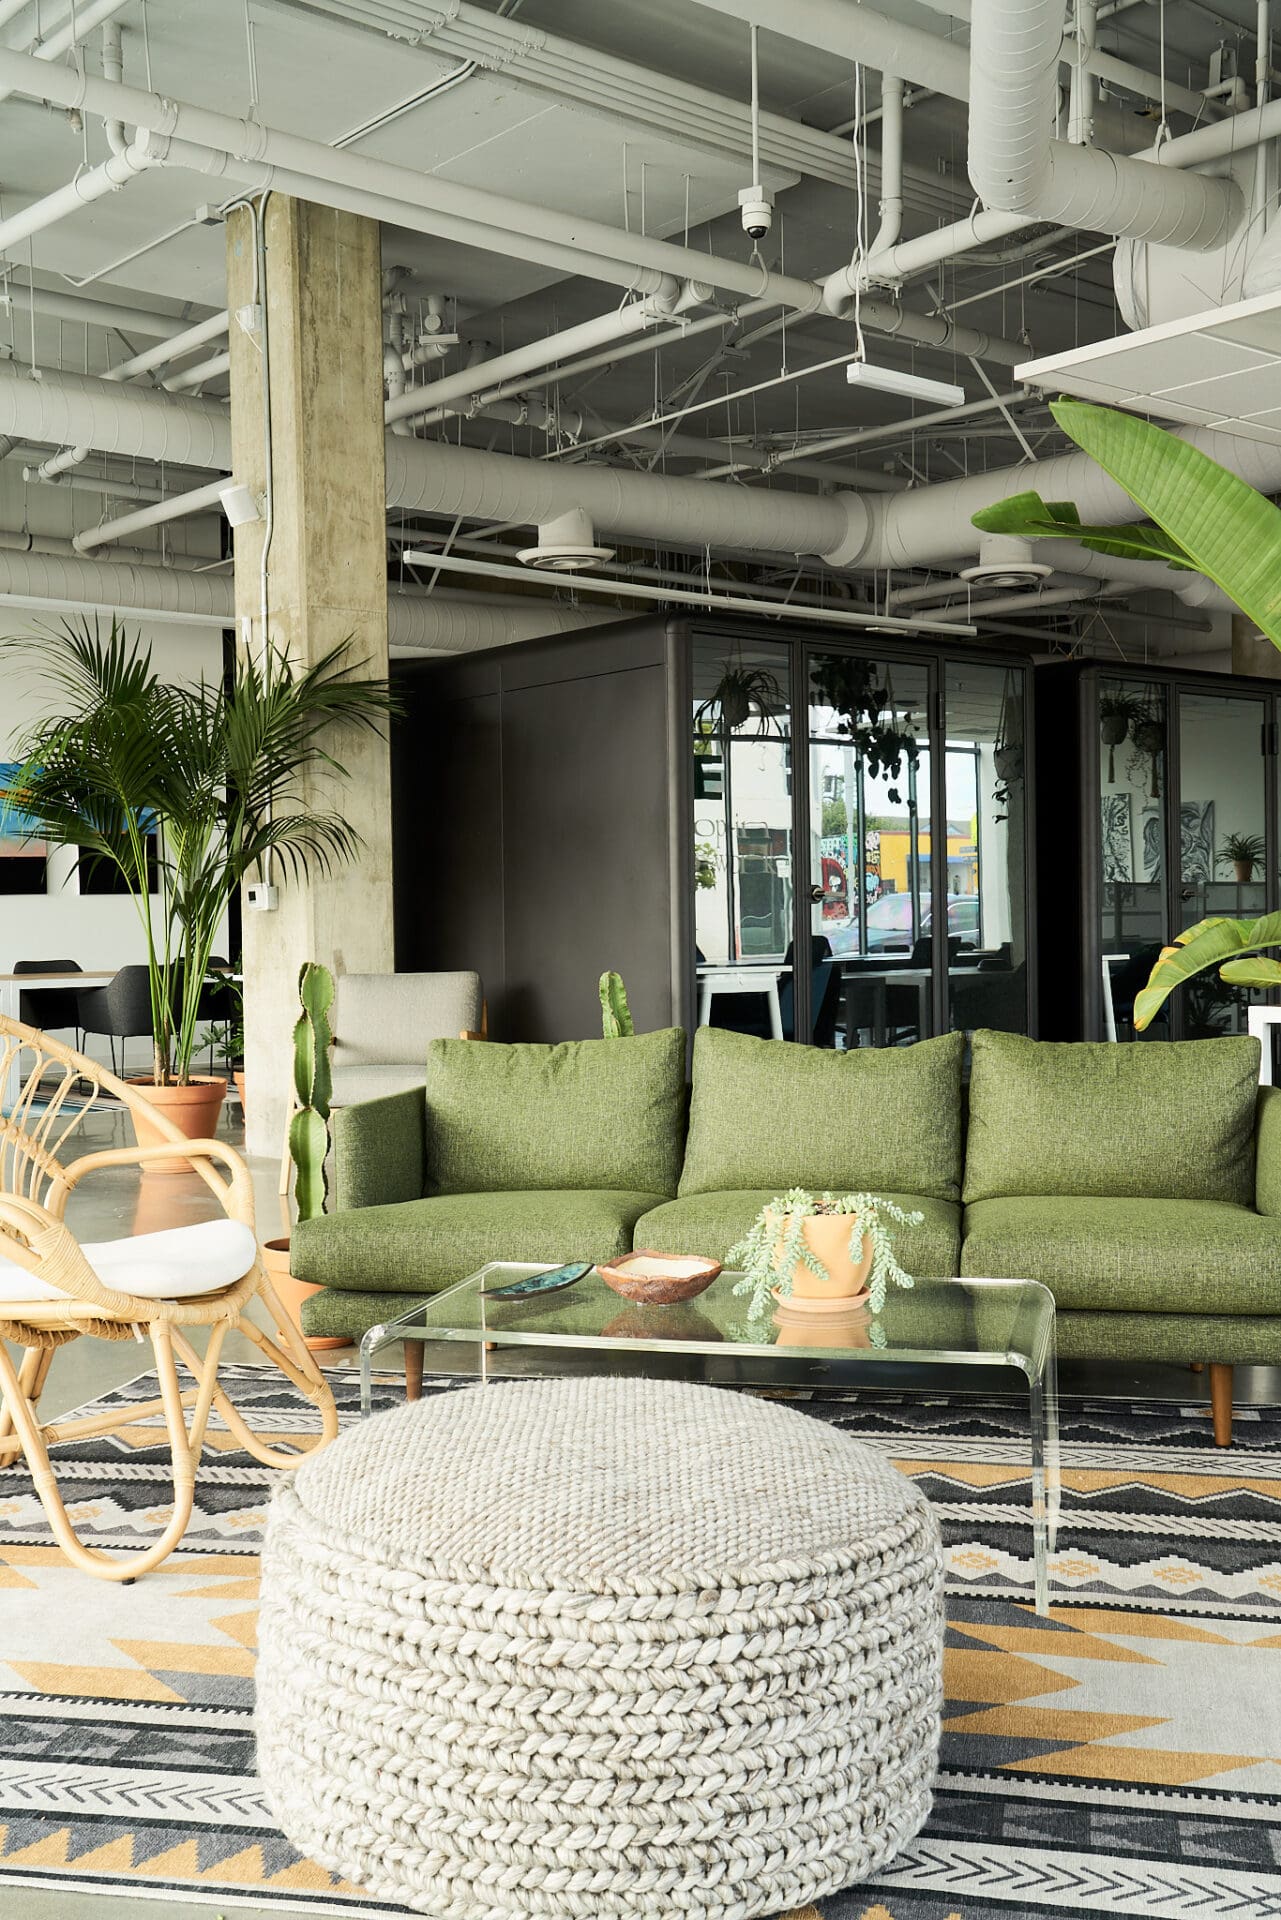 What are countries doing for digital nomads? A plant-filled co-working space in Los Angeles